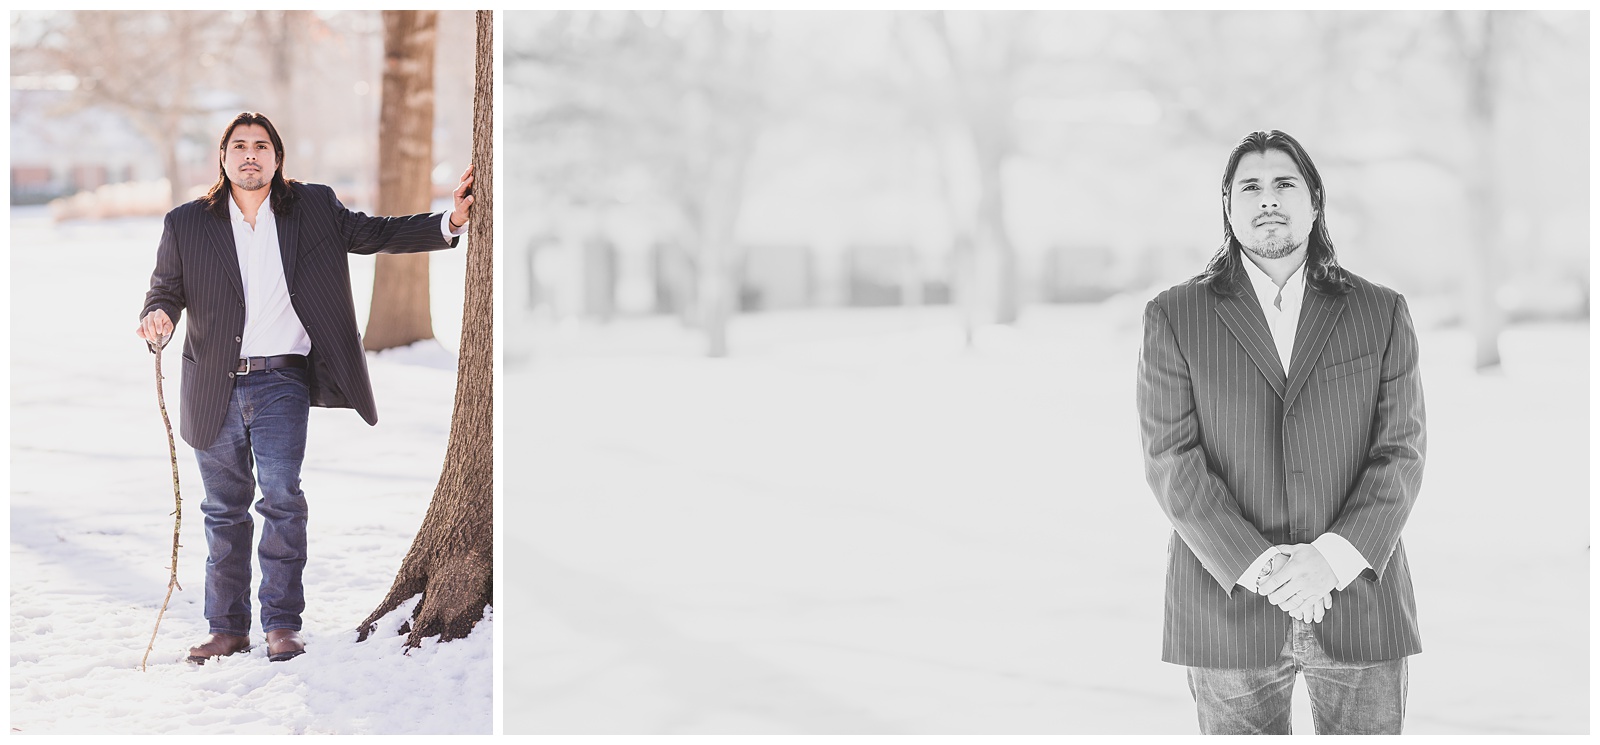 Wedding photography at South Park in Lawrence, Kansas, by Kansas City wedding photographers Wisdom-Watson Weddings.